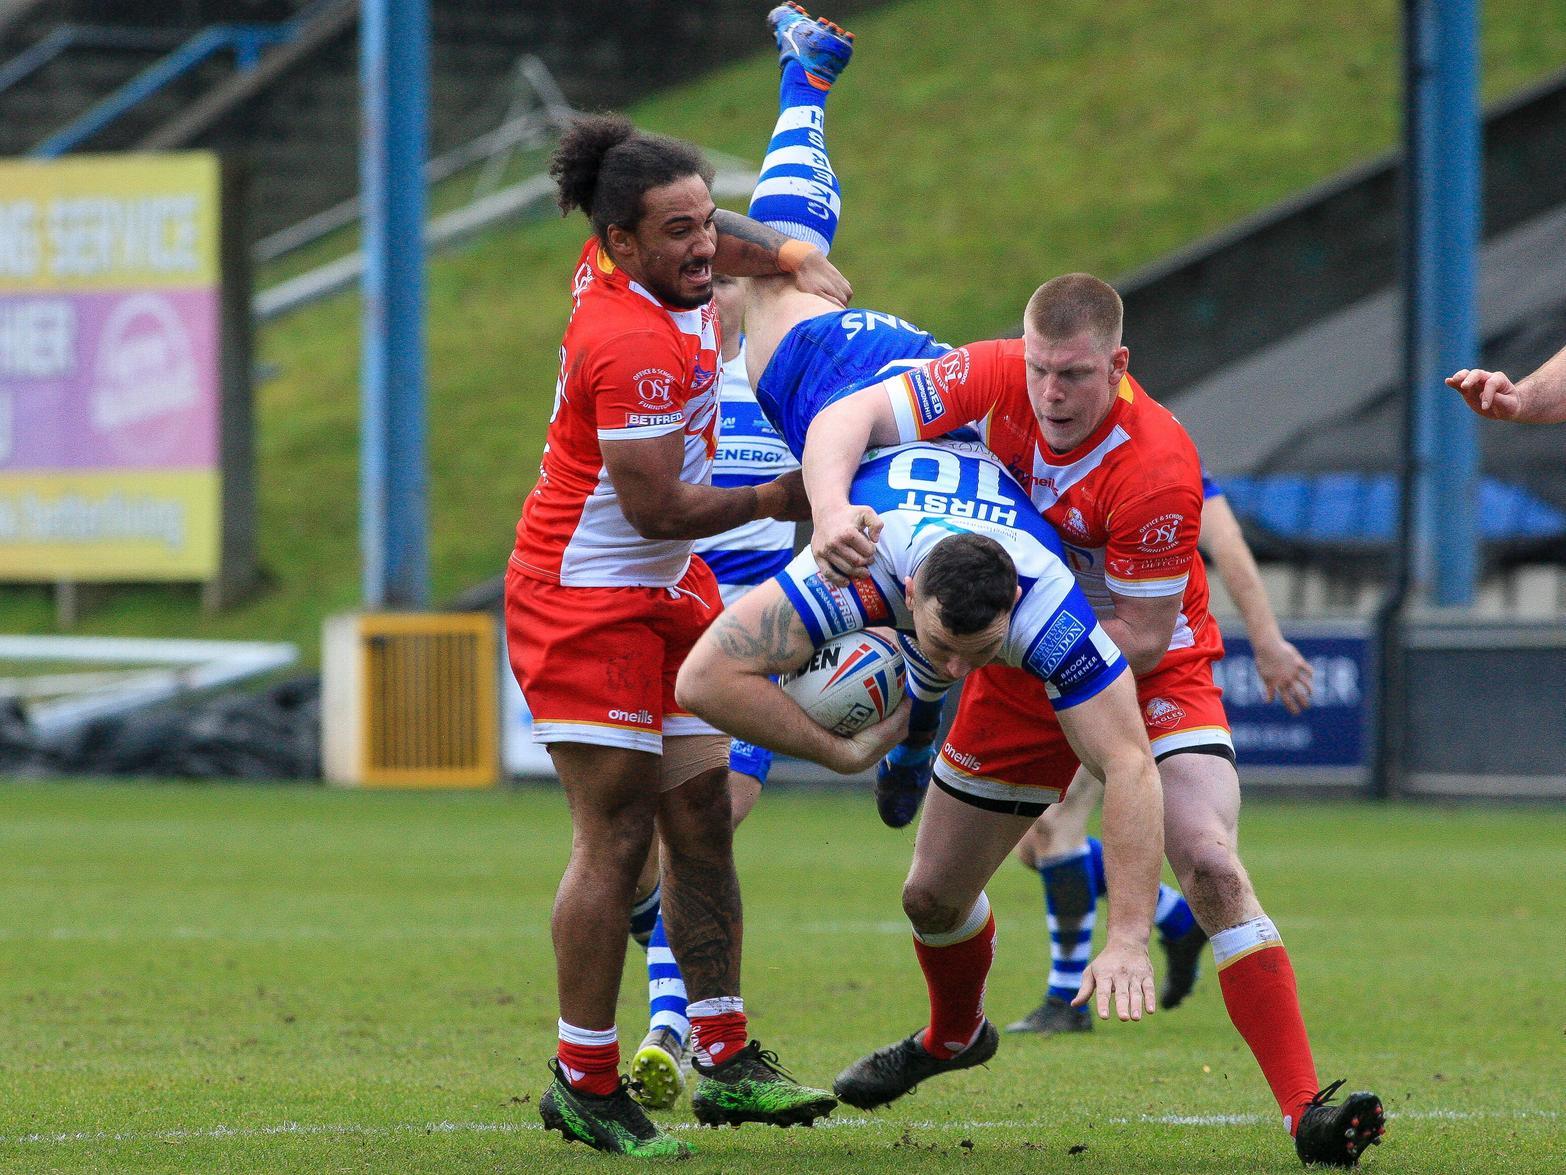 Fax v Sheffield. Photo: Simon Hall of OMH Rugby Pics